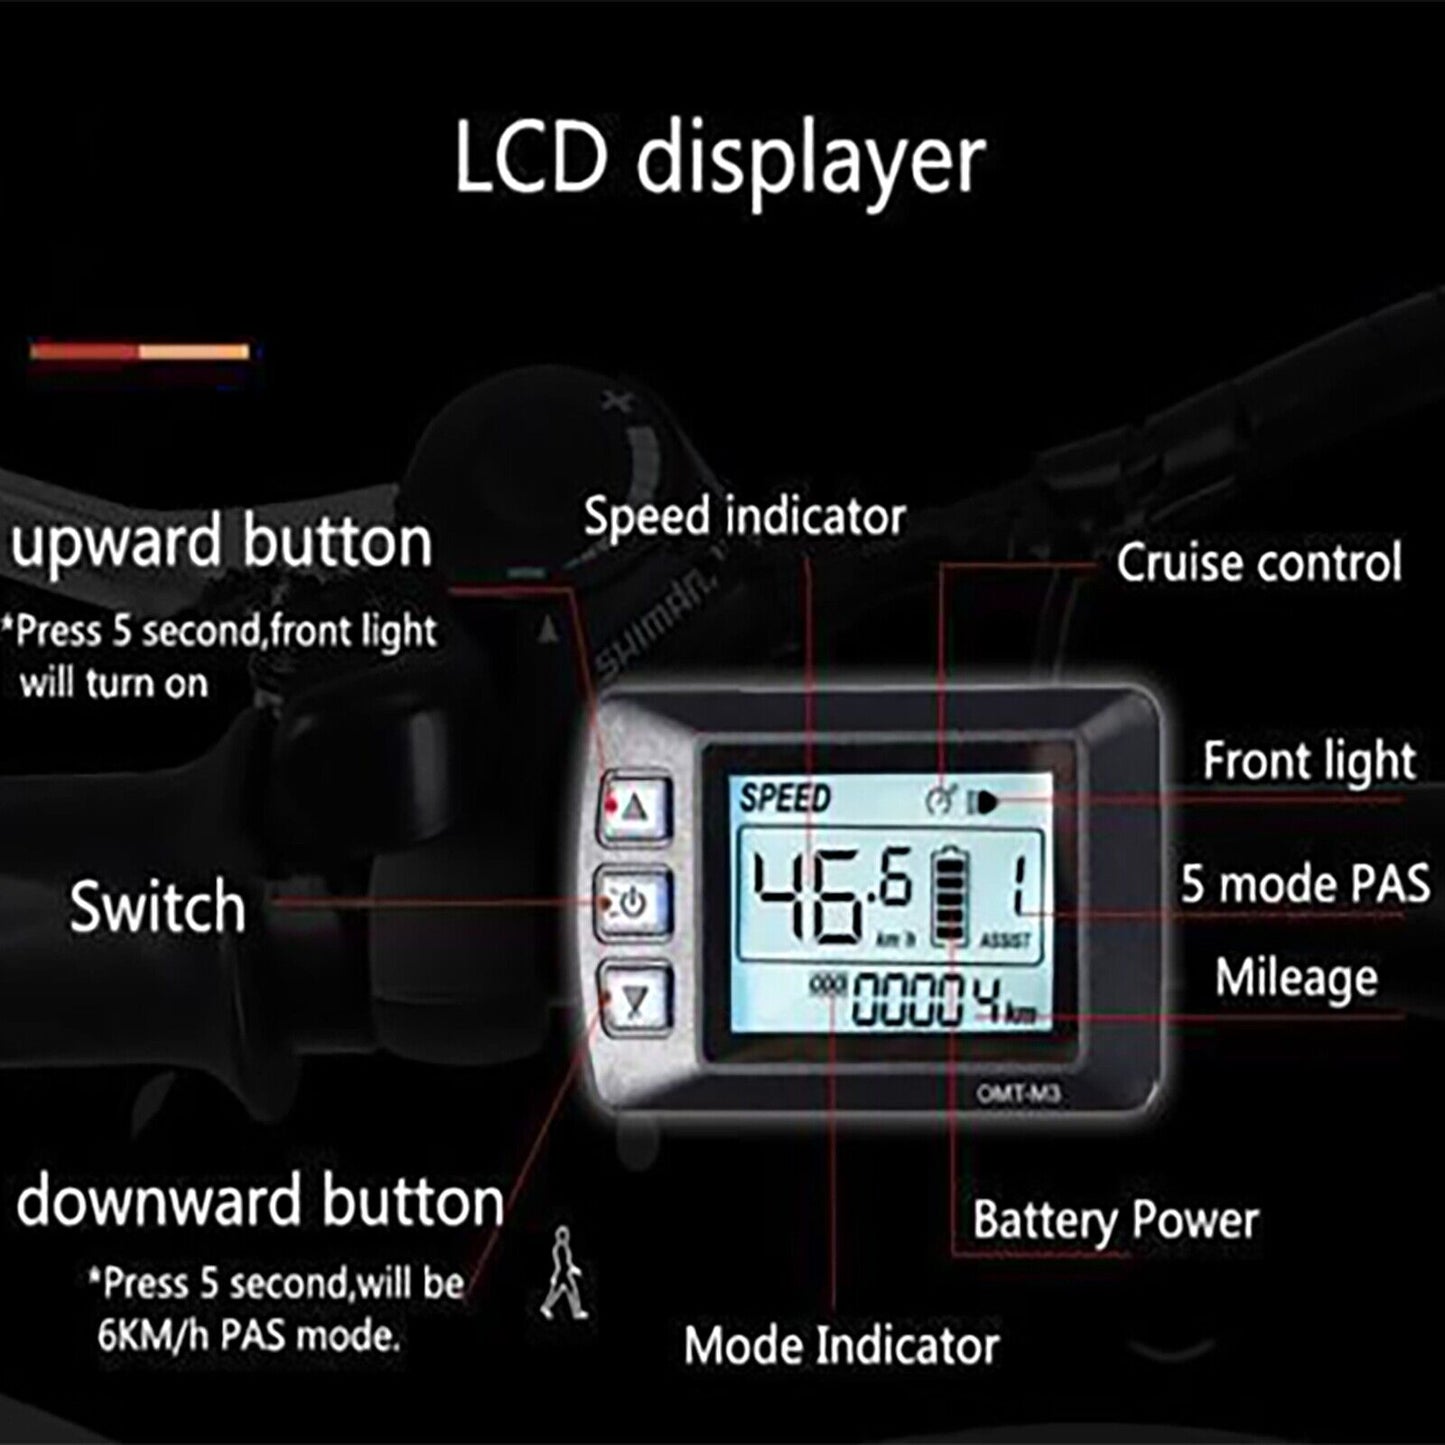 36V OMT3 Speedometer Odometer LCD Digital Control Panel/Display Meter For Electric Ebike Scooter